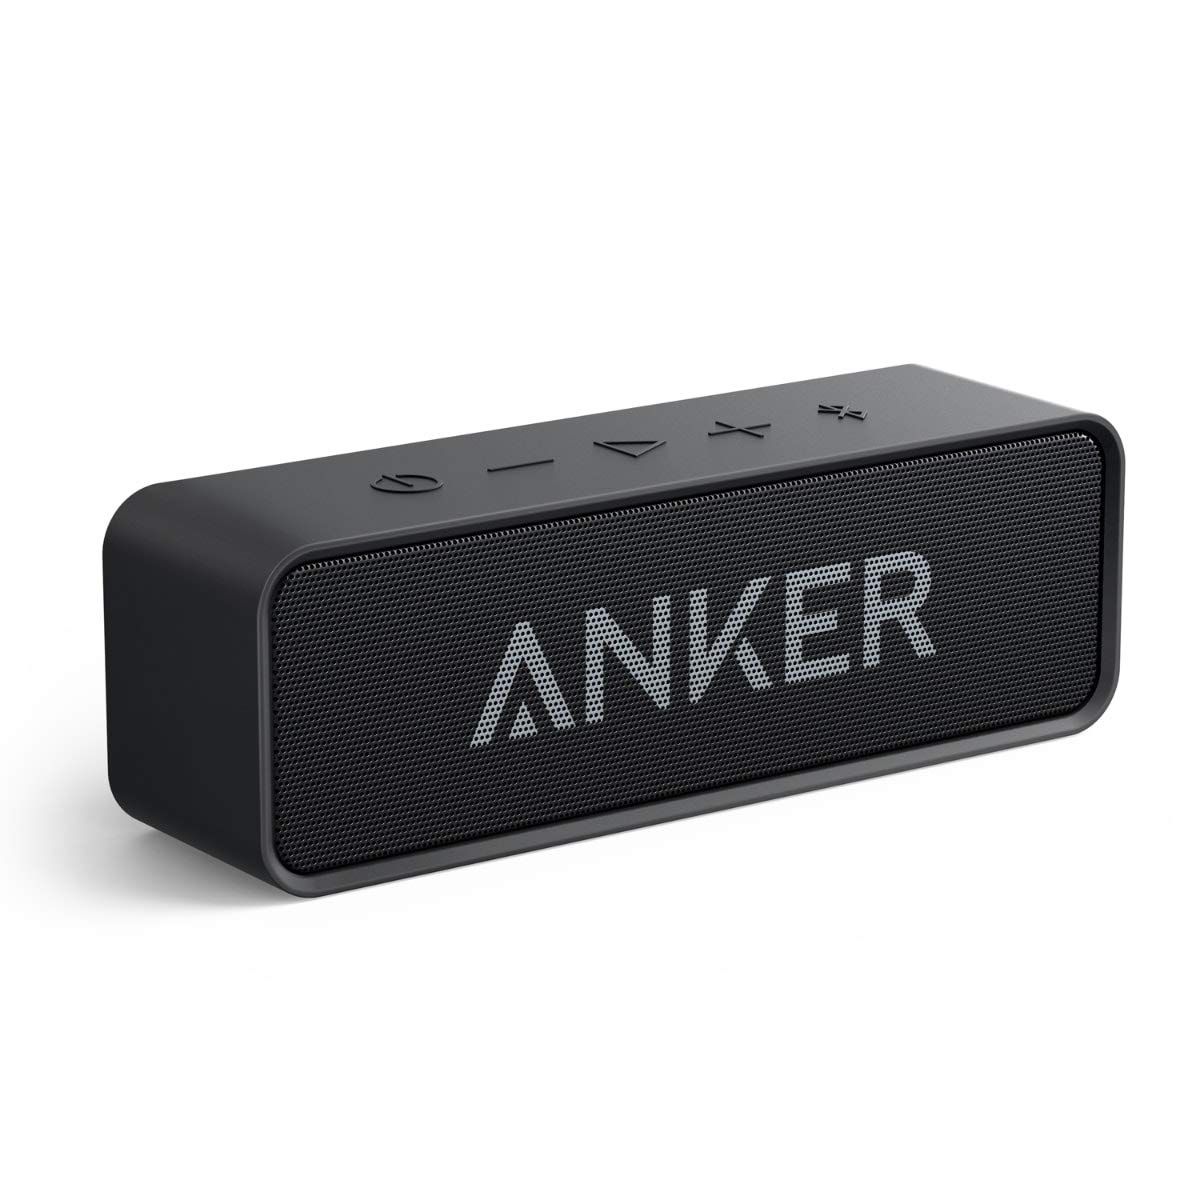 Gifts for Brother: Anker Soundcore Bluetooth Speaker with Loud Stereo Sound on Amazon